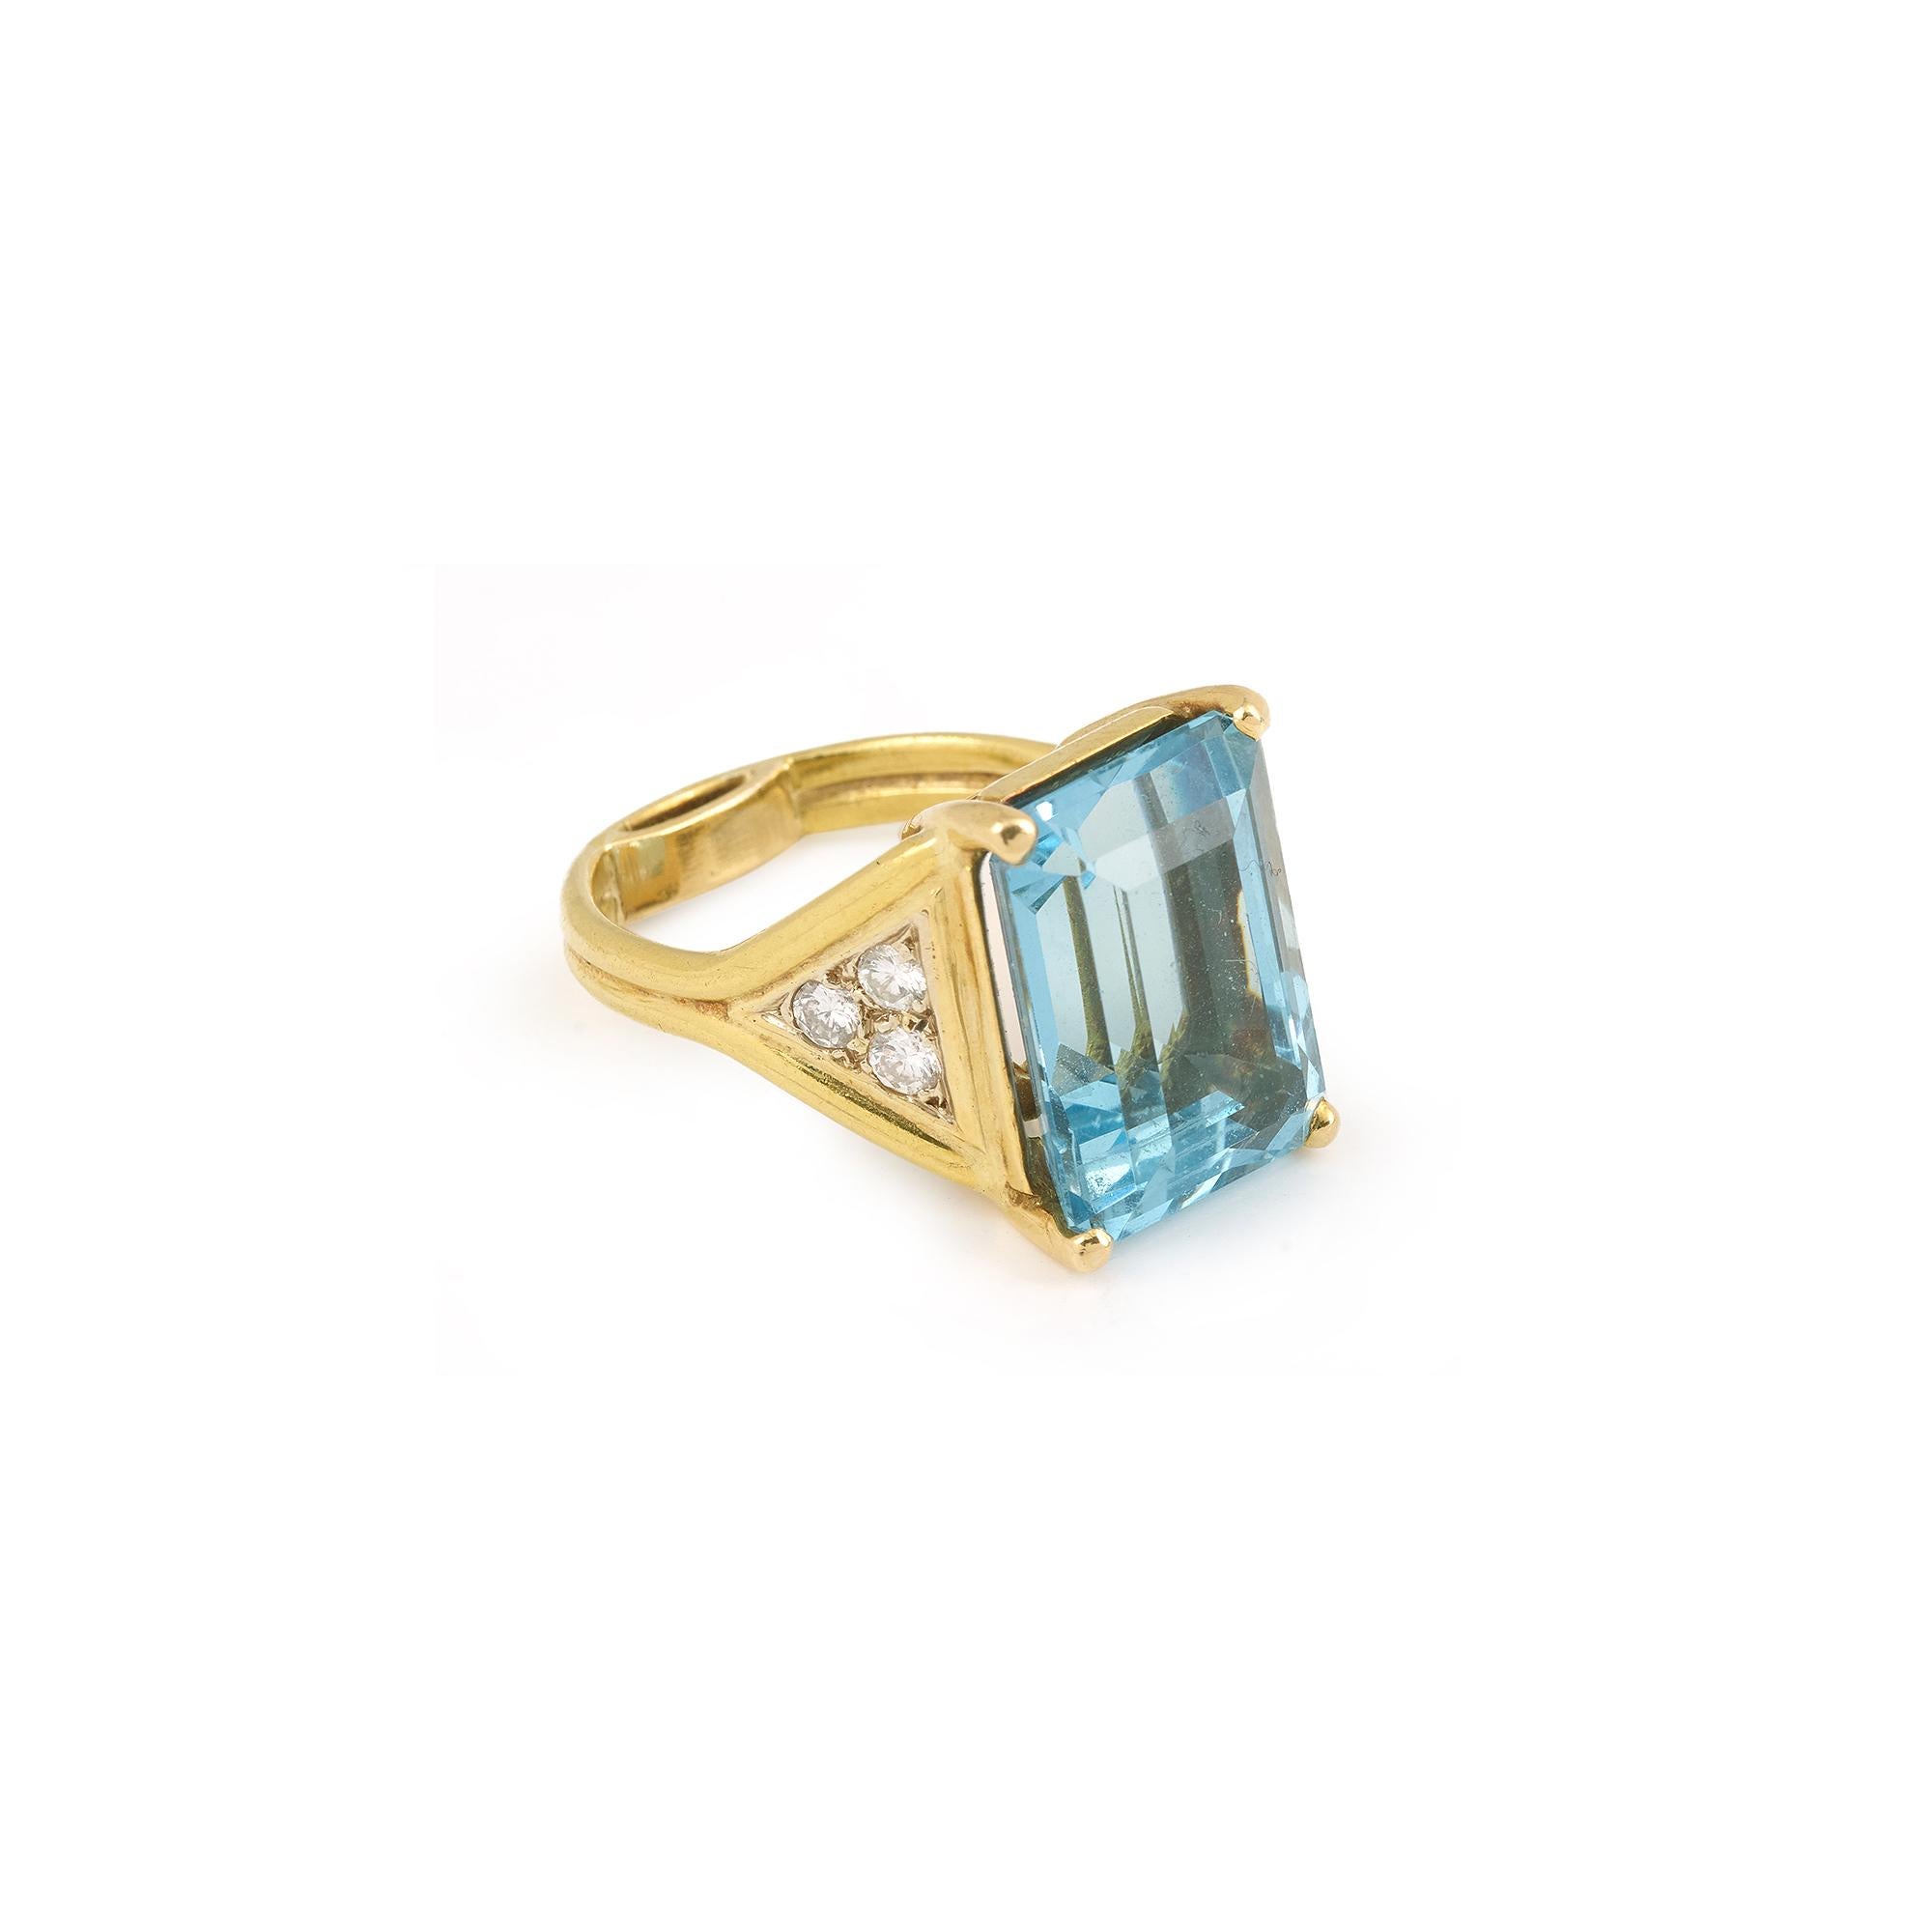 Exceptional yellow gold ring set with a large rectangular cut aquamarine and 6 brilliant diamonds.

This amazing Aquamarine was purchased in Brazil in the 50s/60s and mounted in Paris in the 70s/80s.

Dimensions of the aquamarine: 16.05 x 11.55 x